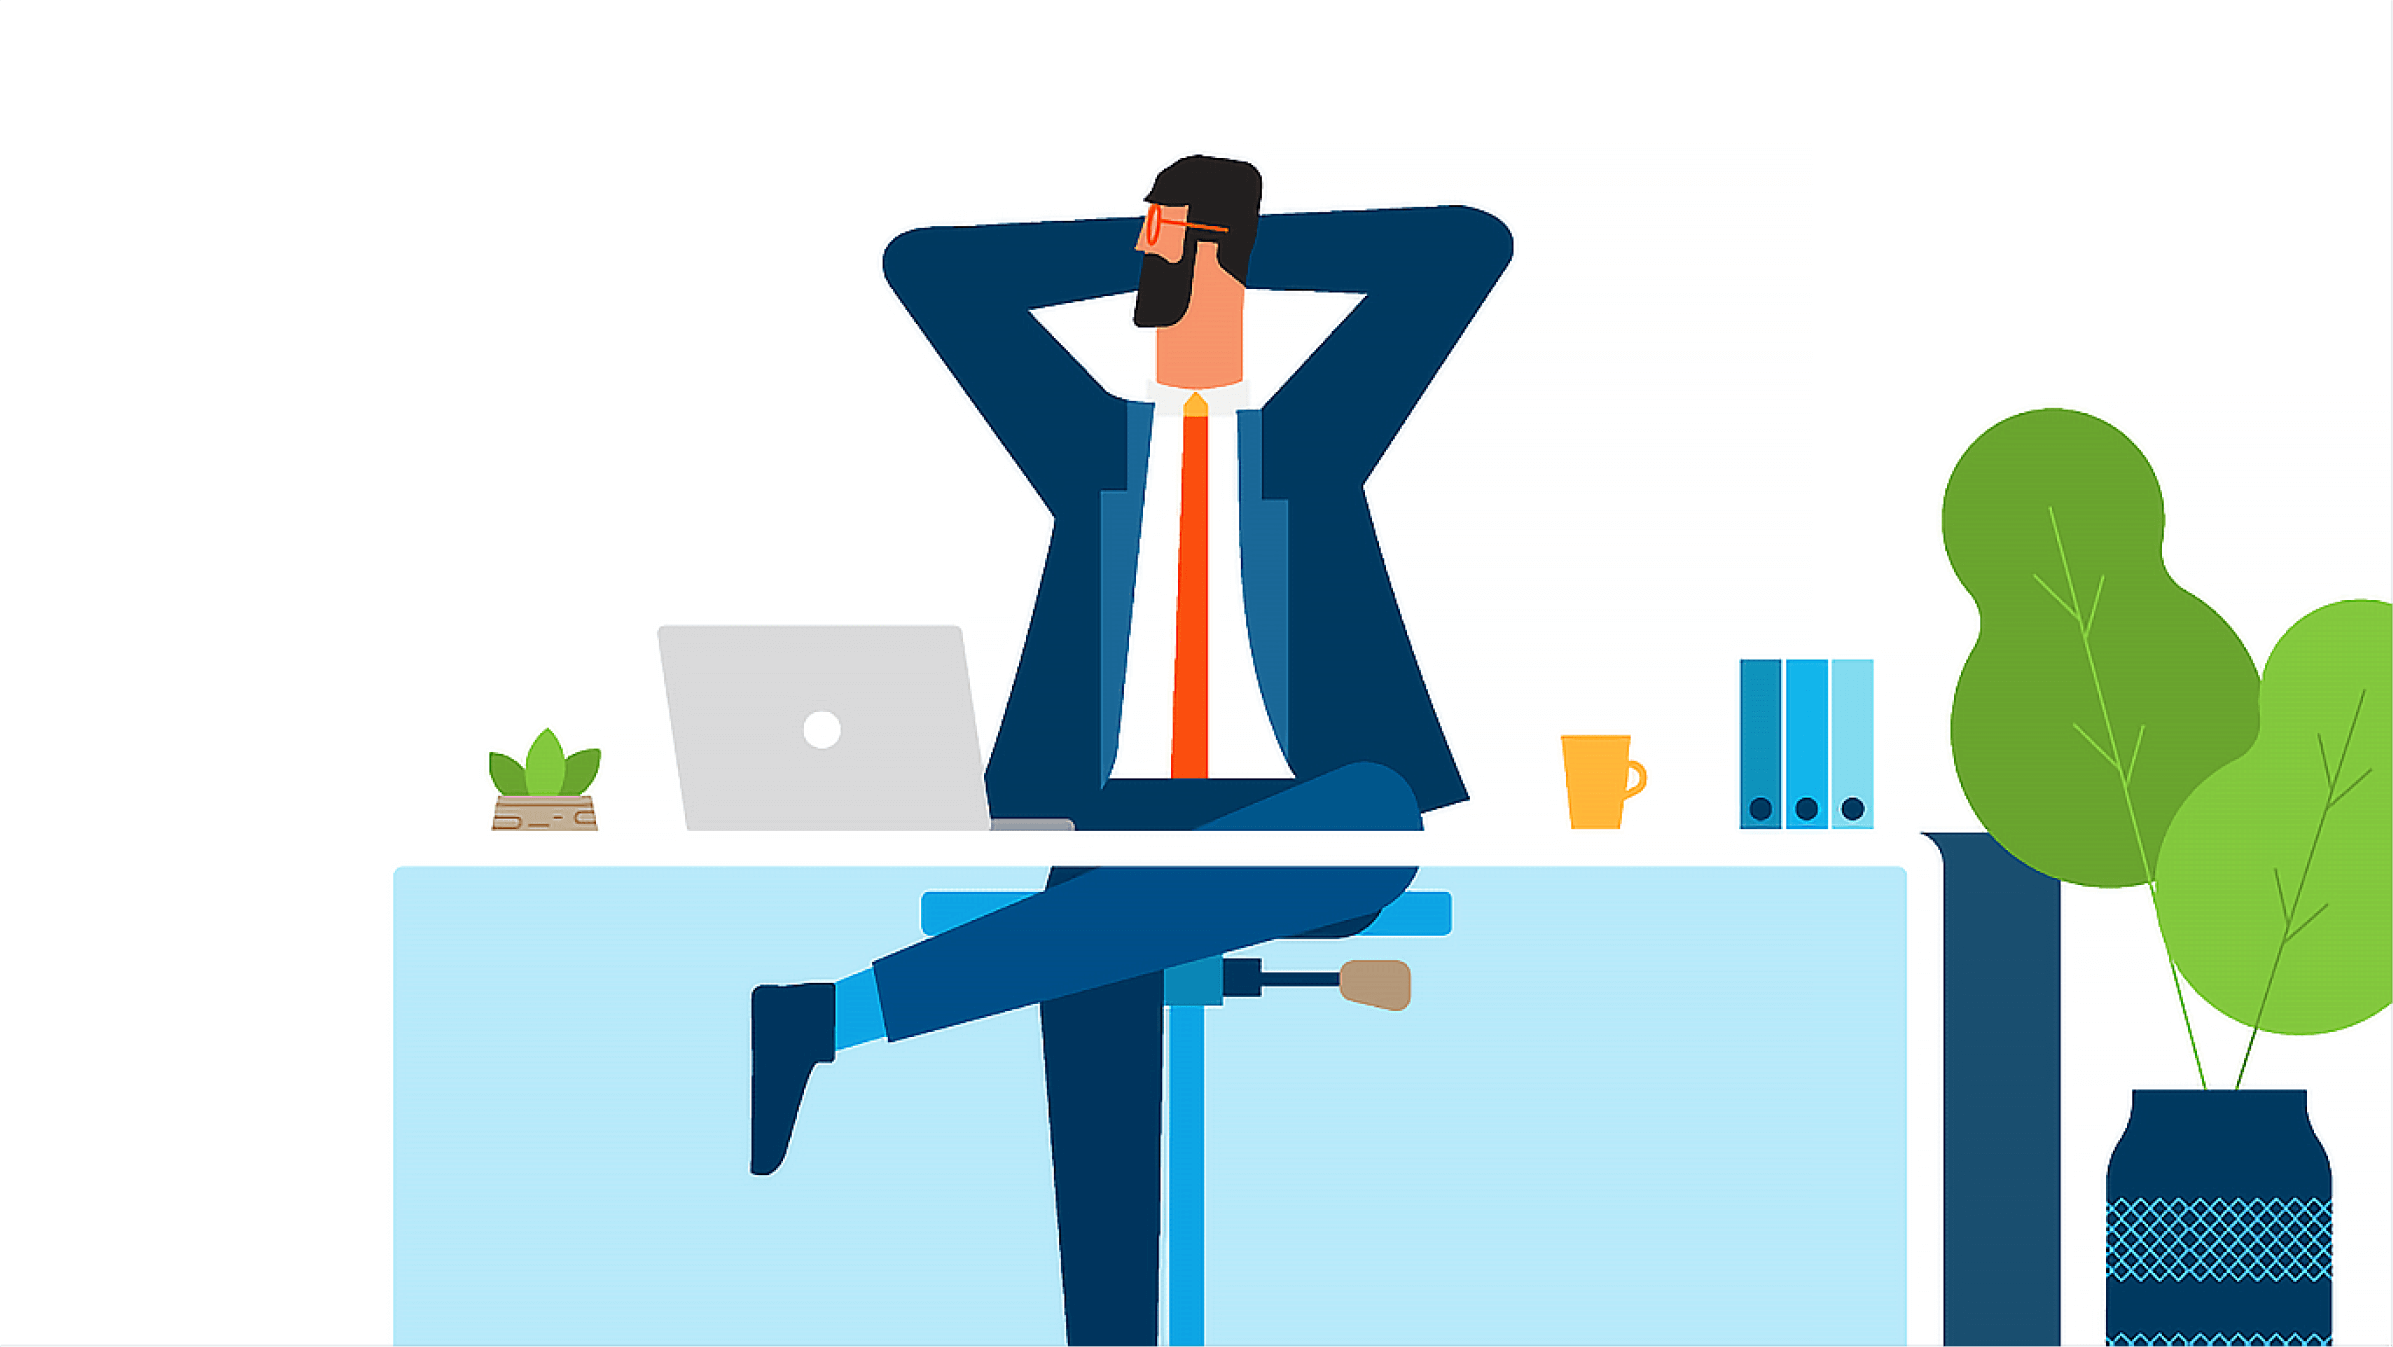 Xero makes accounting easy. An accountant stretches while sitting at his desk with a laptop, coffee and files.